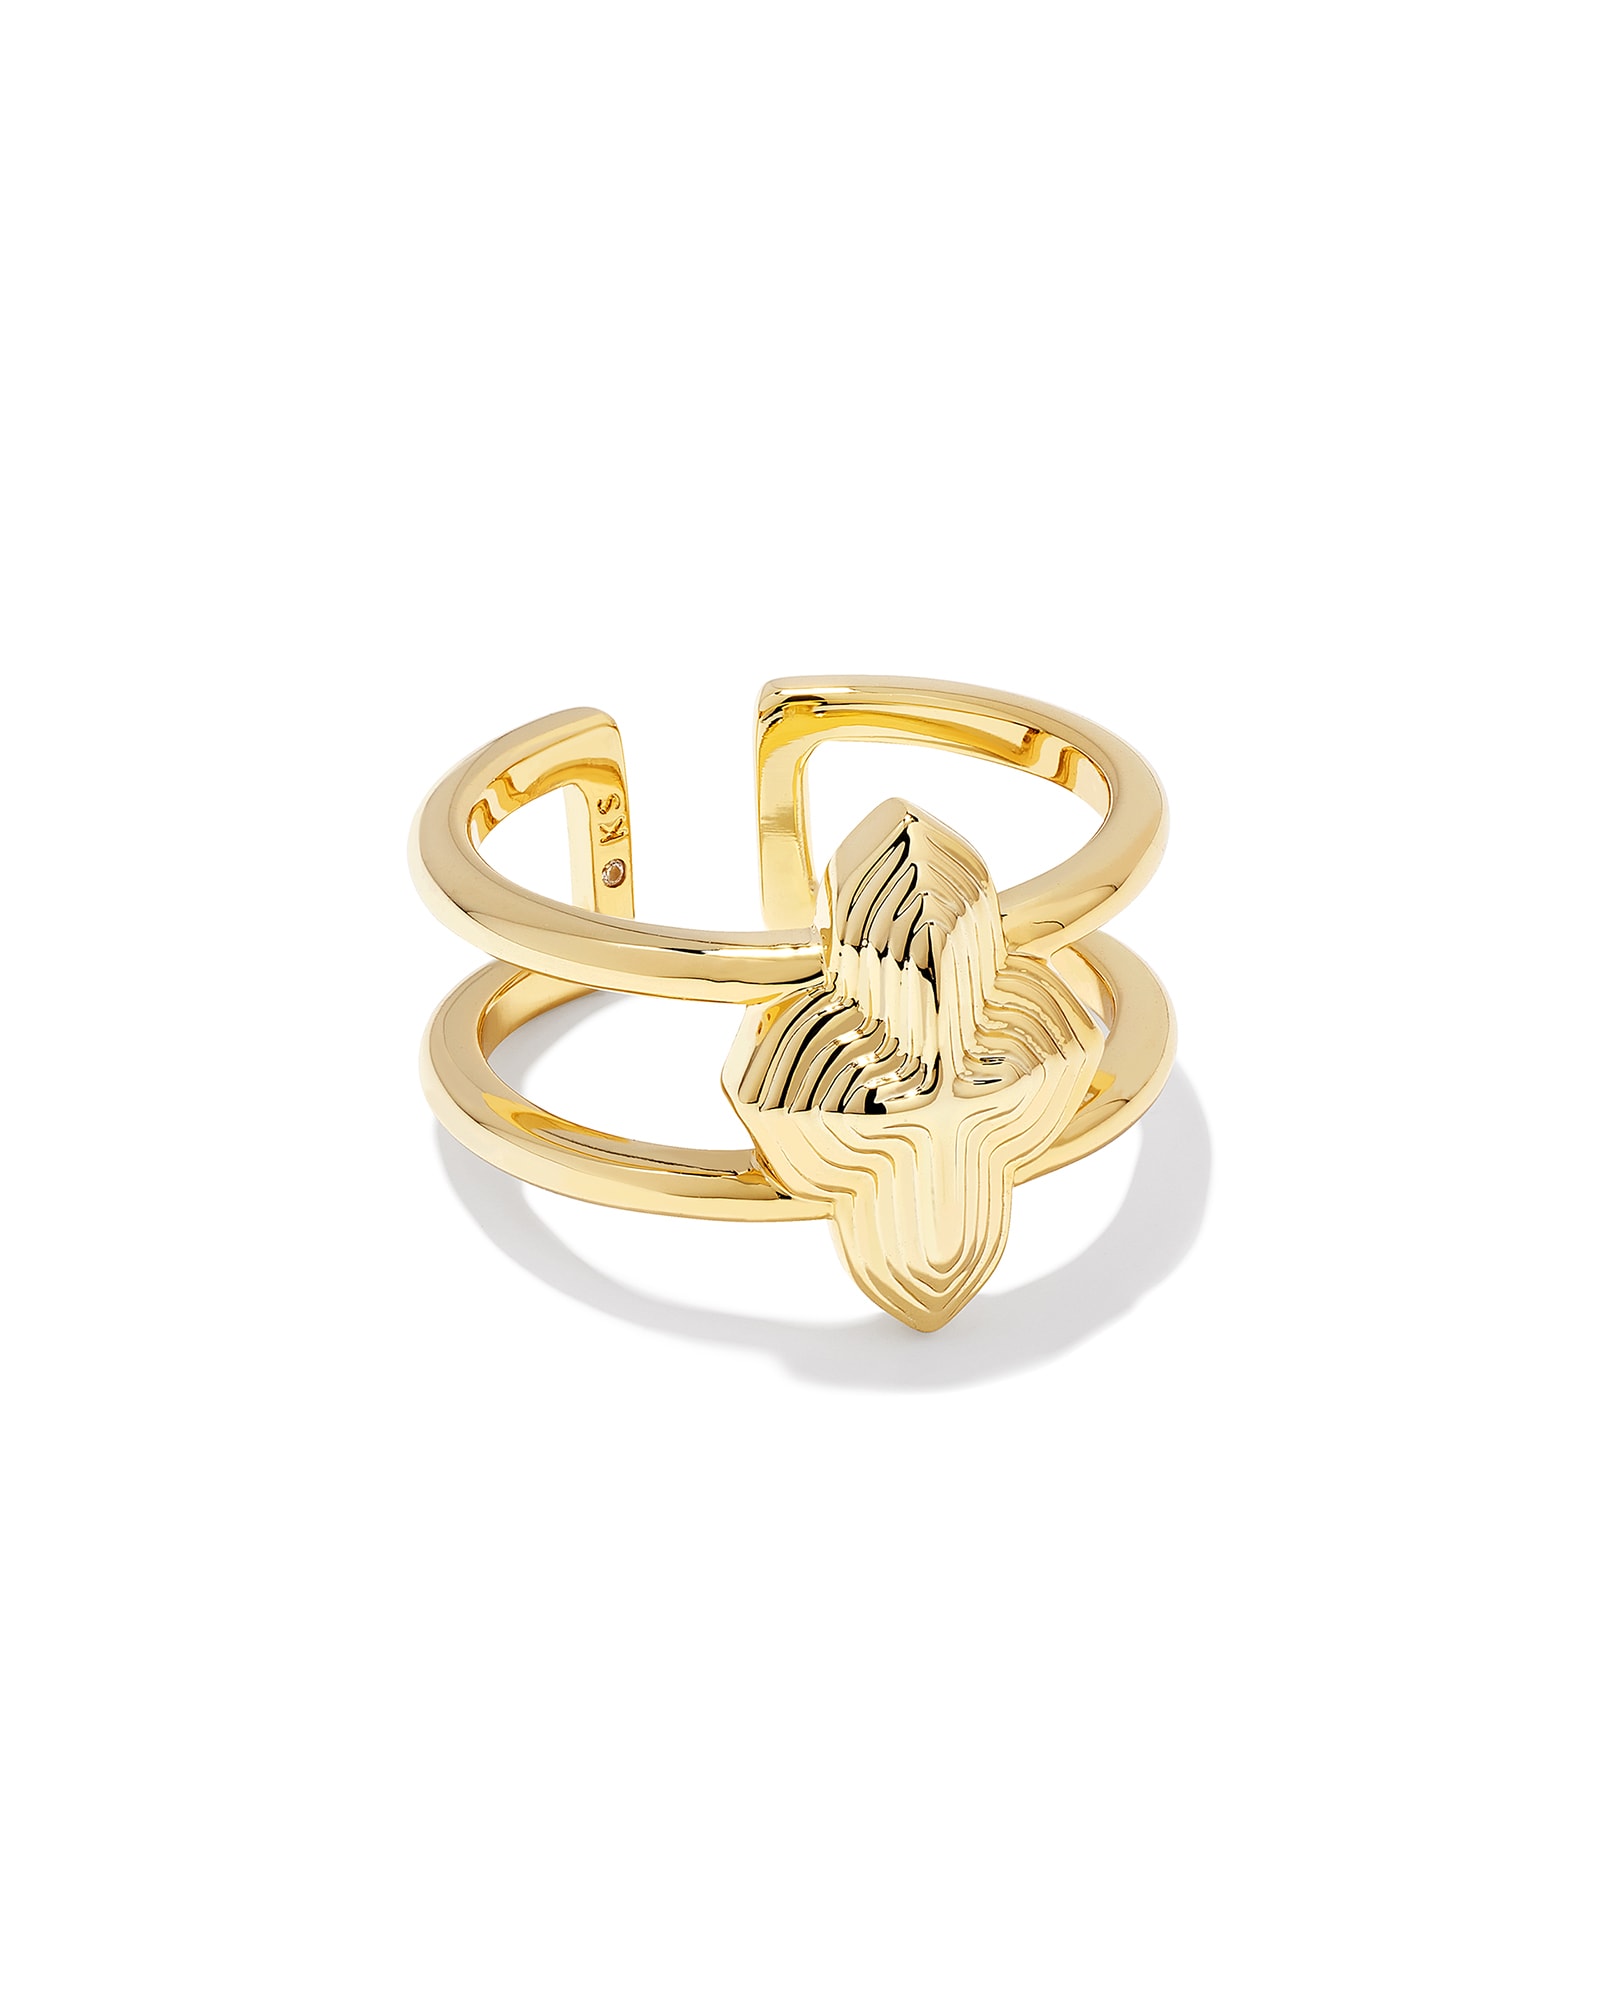 Kendra Scott Abbie Metal Double Band Ring in Gold | Plated Brass/Metal